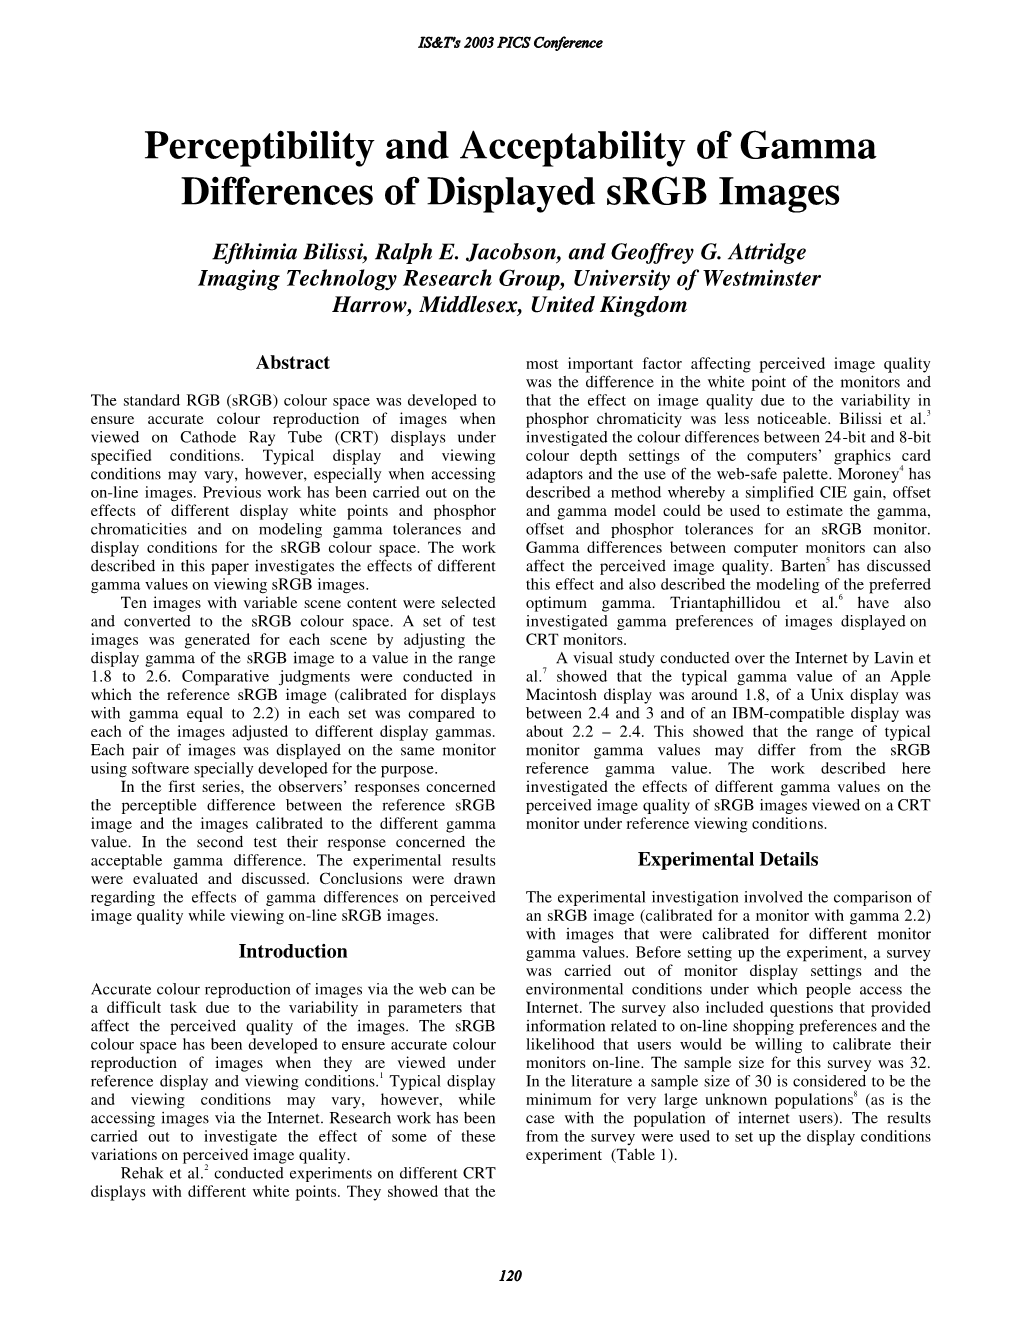 Perceptibility and Acceptability of Gamma Differences of Displayed Srgb Images